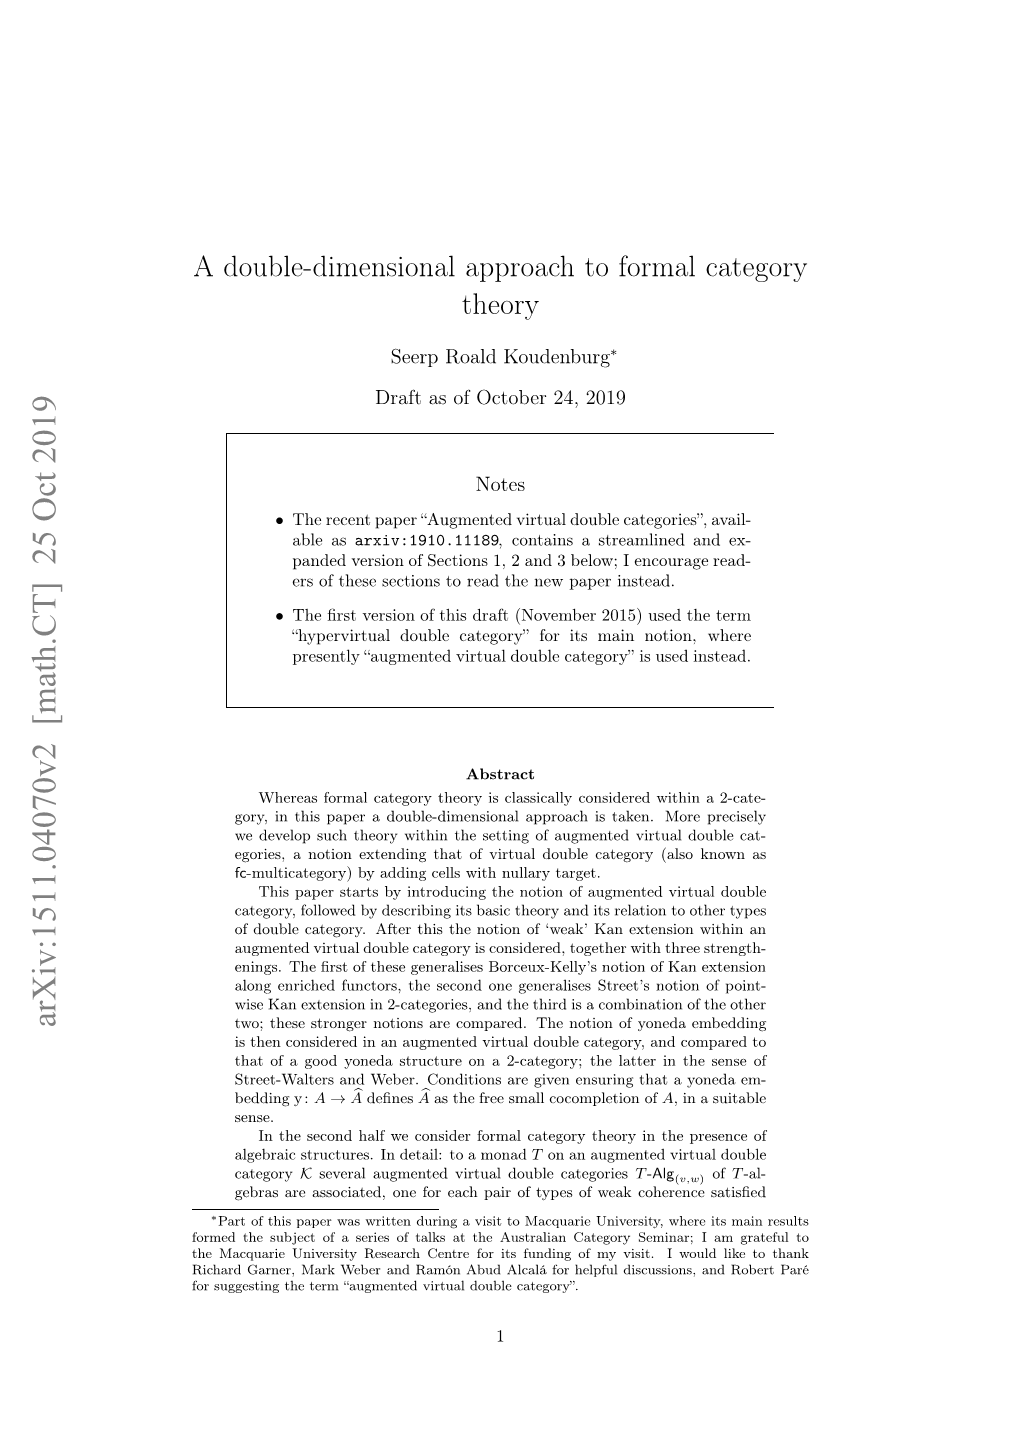 A Double-Dimensional Approach to Formal Category Theory